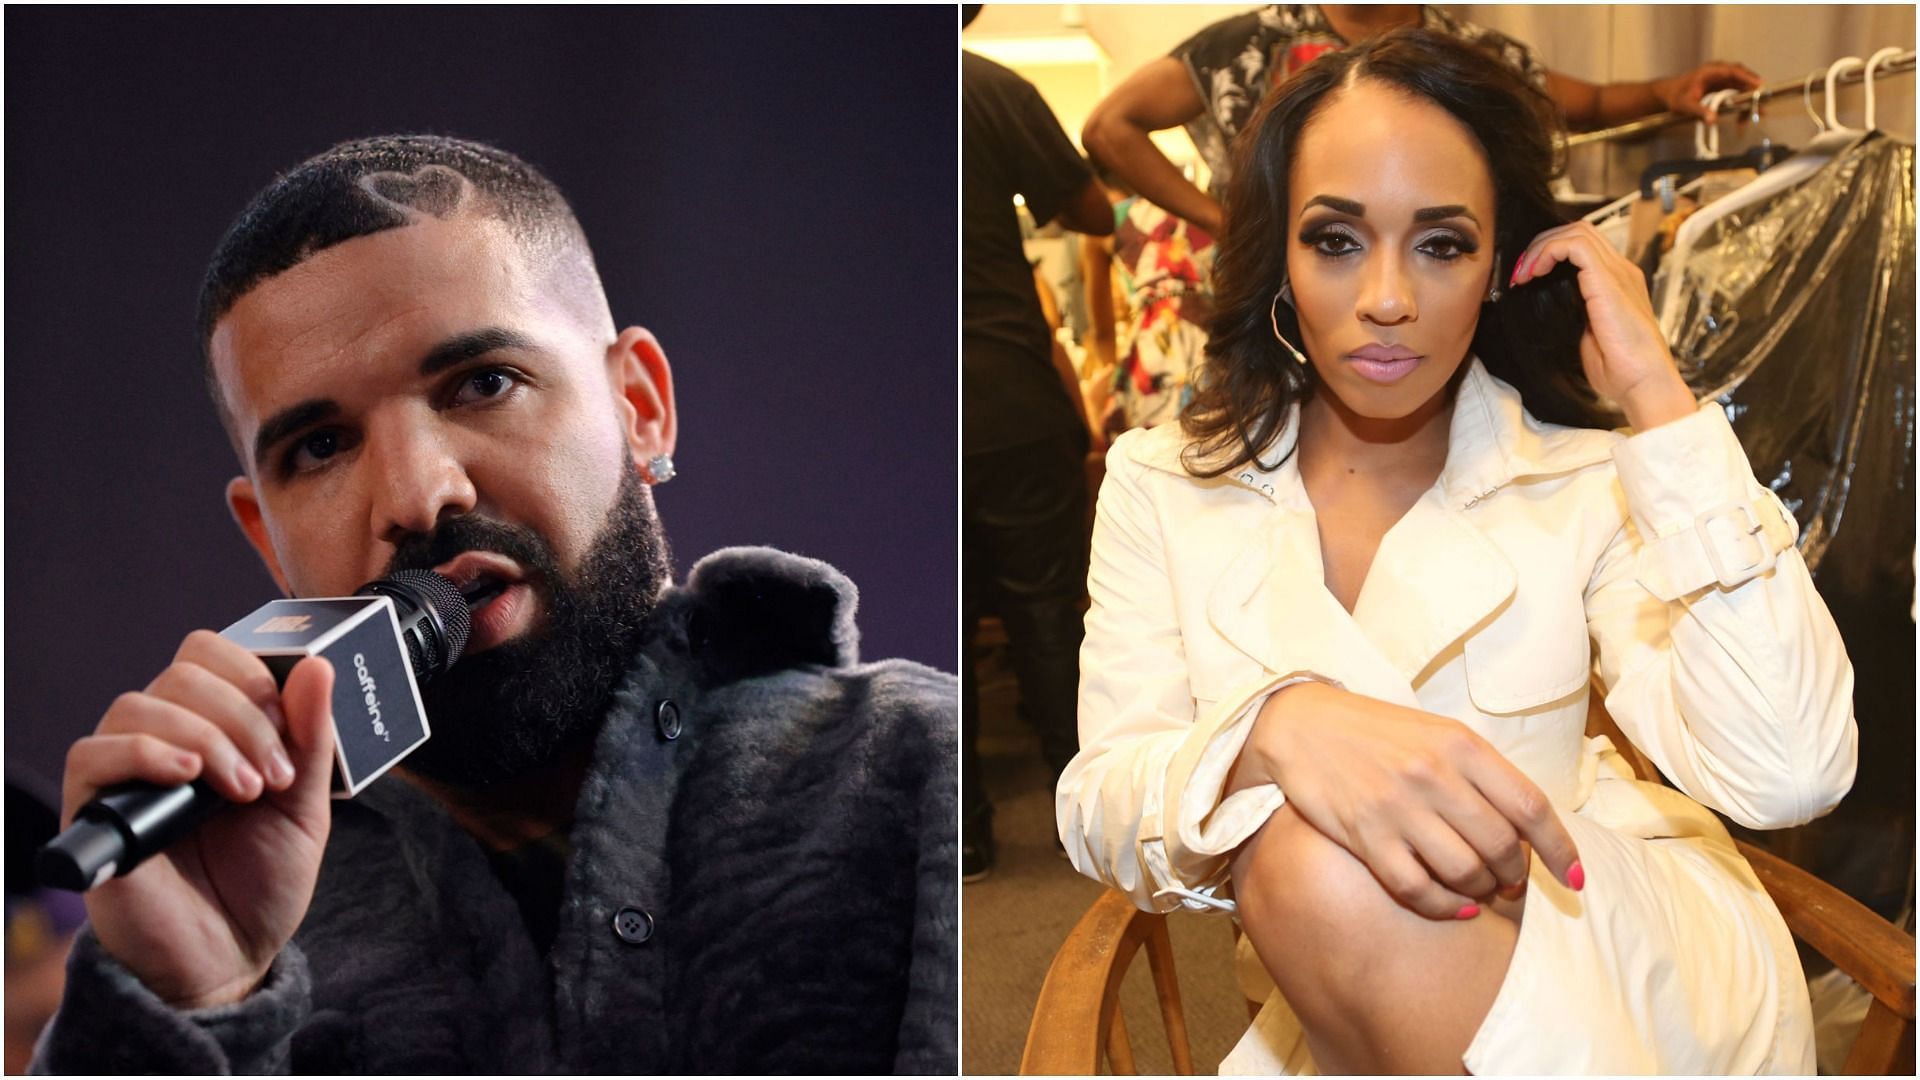 Melyssa Ford recently spoke up about her past relationship with Drake (Images via Amy Sussman/Johnny Nunez/Getty Images)